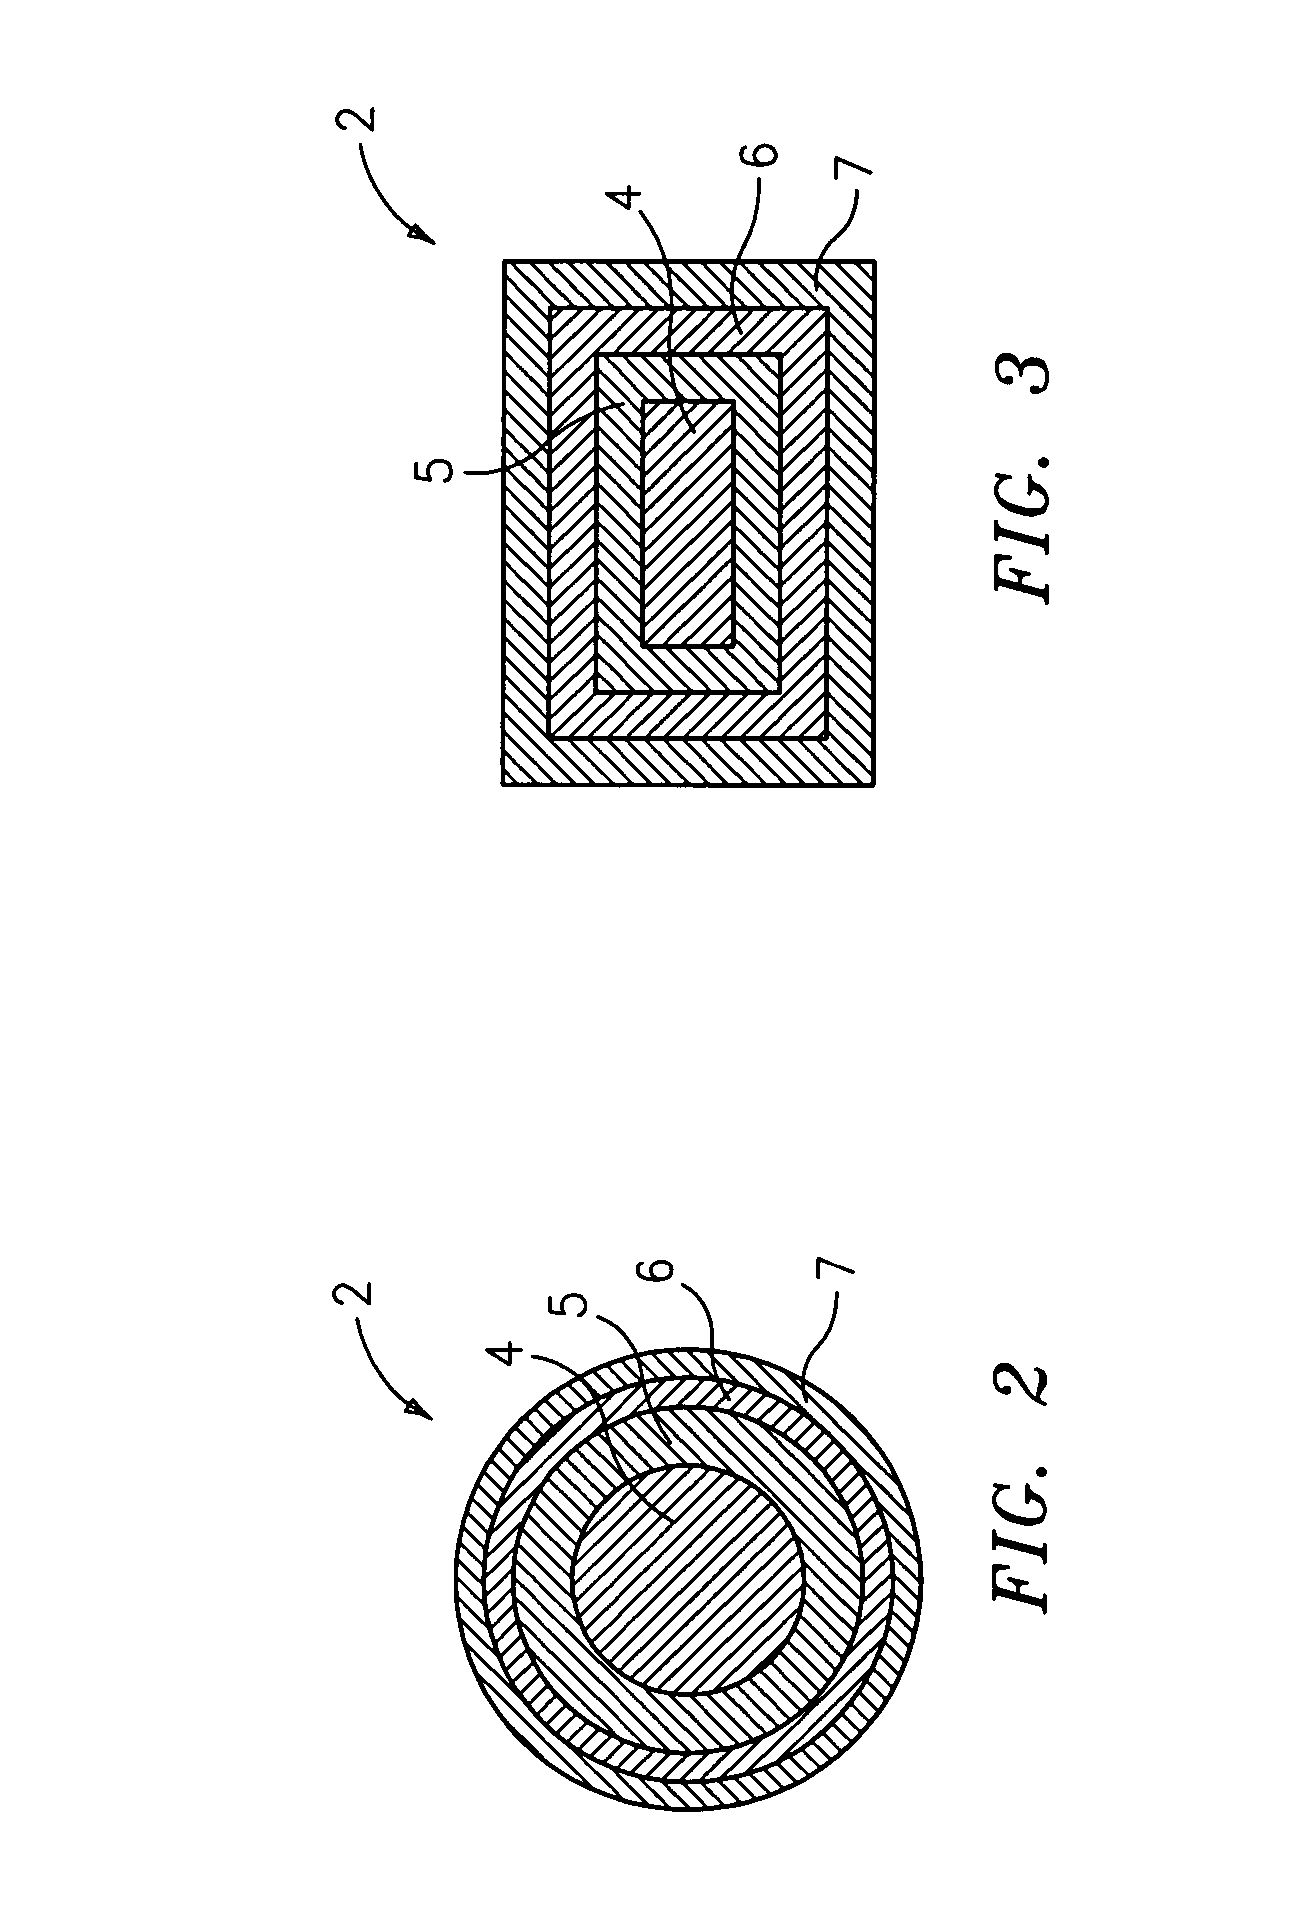 Piezocable based sensor for measuring unsteady pressures inside a pipe